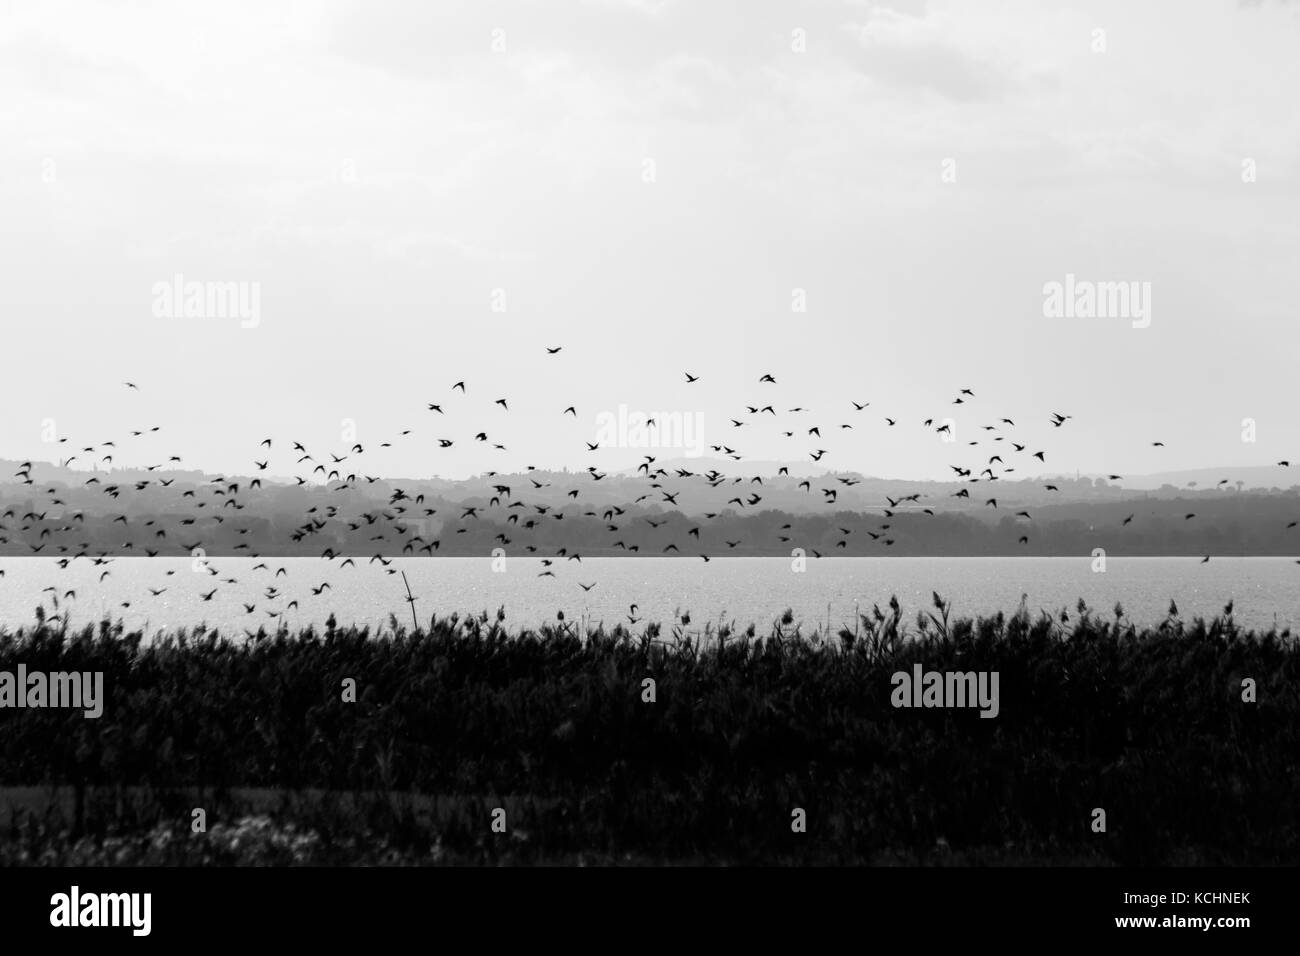 A flock of birds flying over a lake shore, with plants and vegetation in the foreground and distant hills in the foreground Stock Photo